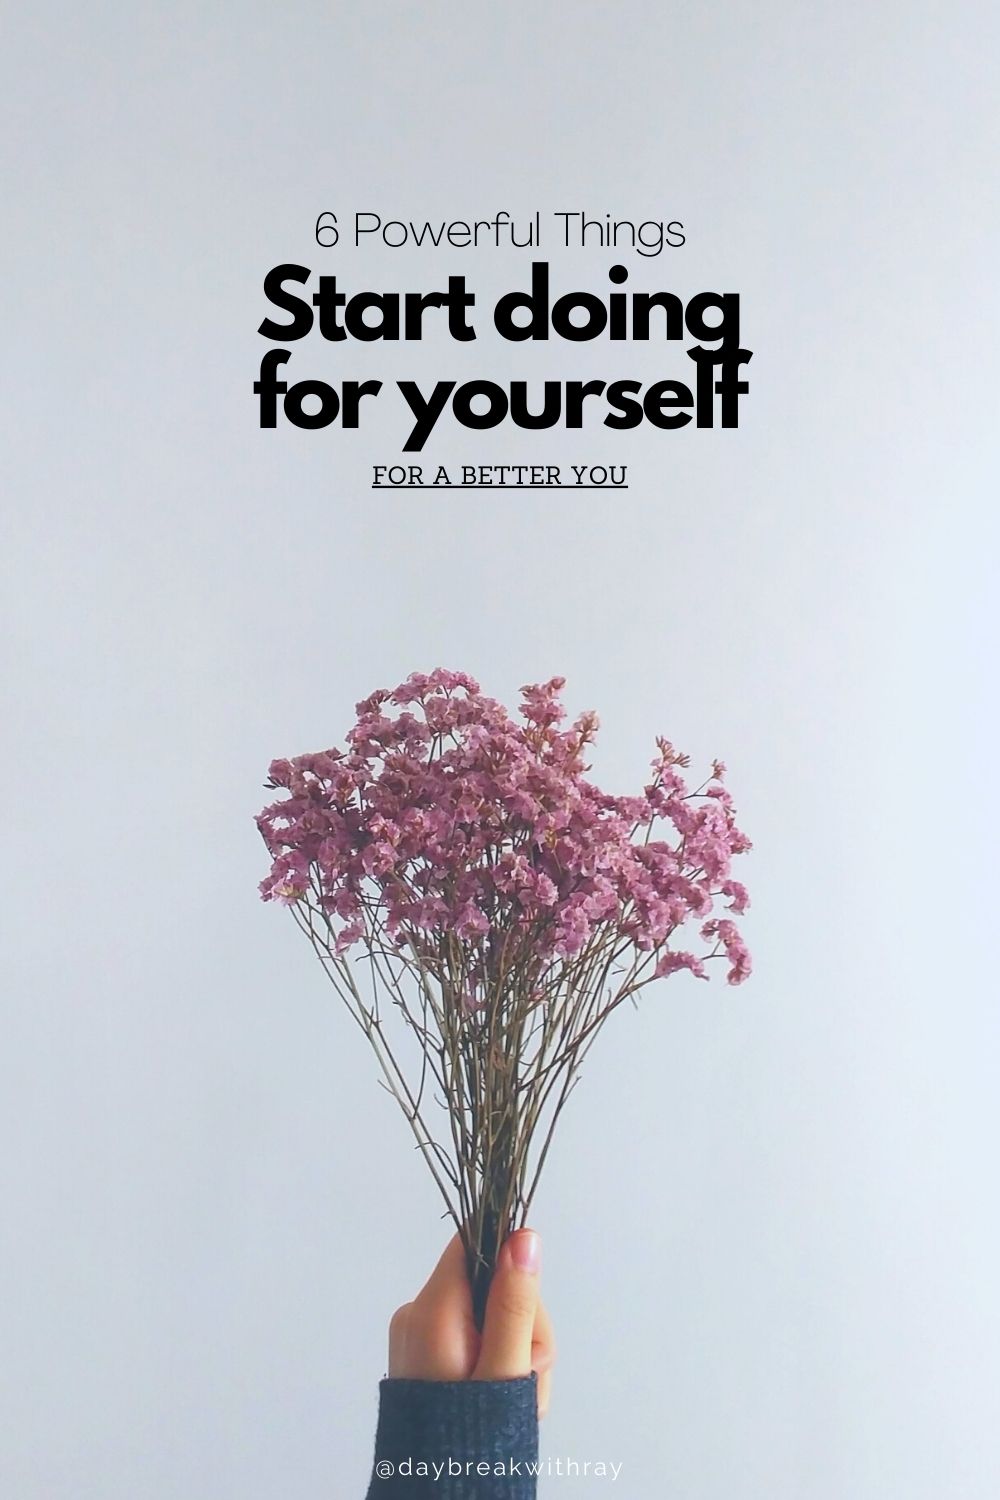 6 things to start doing for yourself